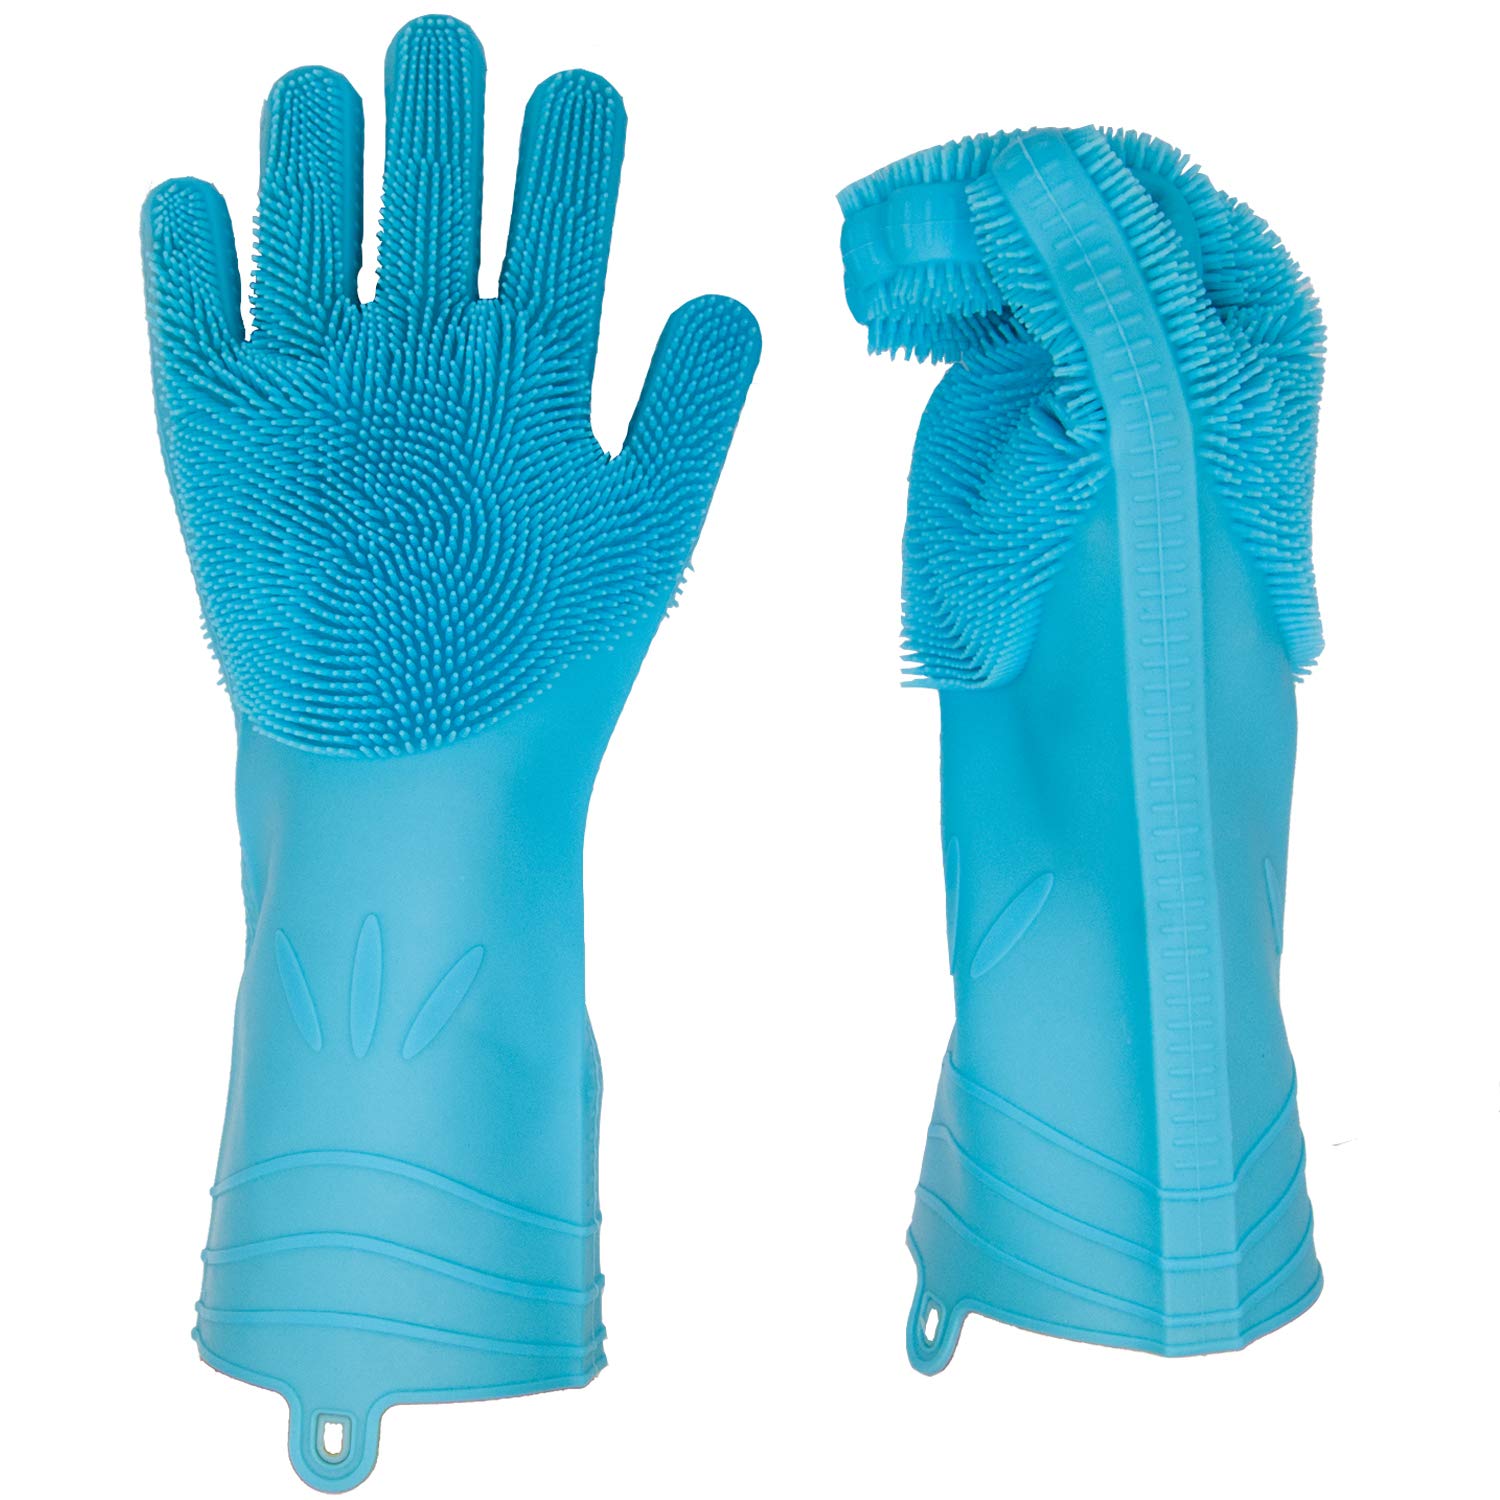 Dishwashing Gloves Silicone Reusable 2 sided Foaming Heat Resistant Scrubber for Kitchen 1 Pair